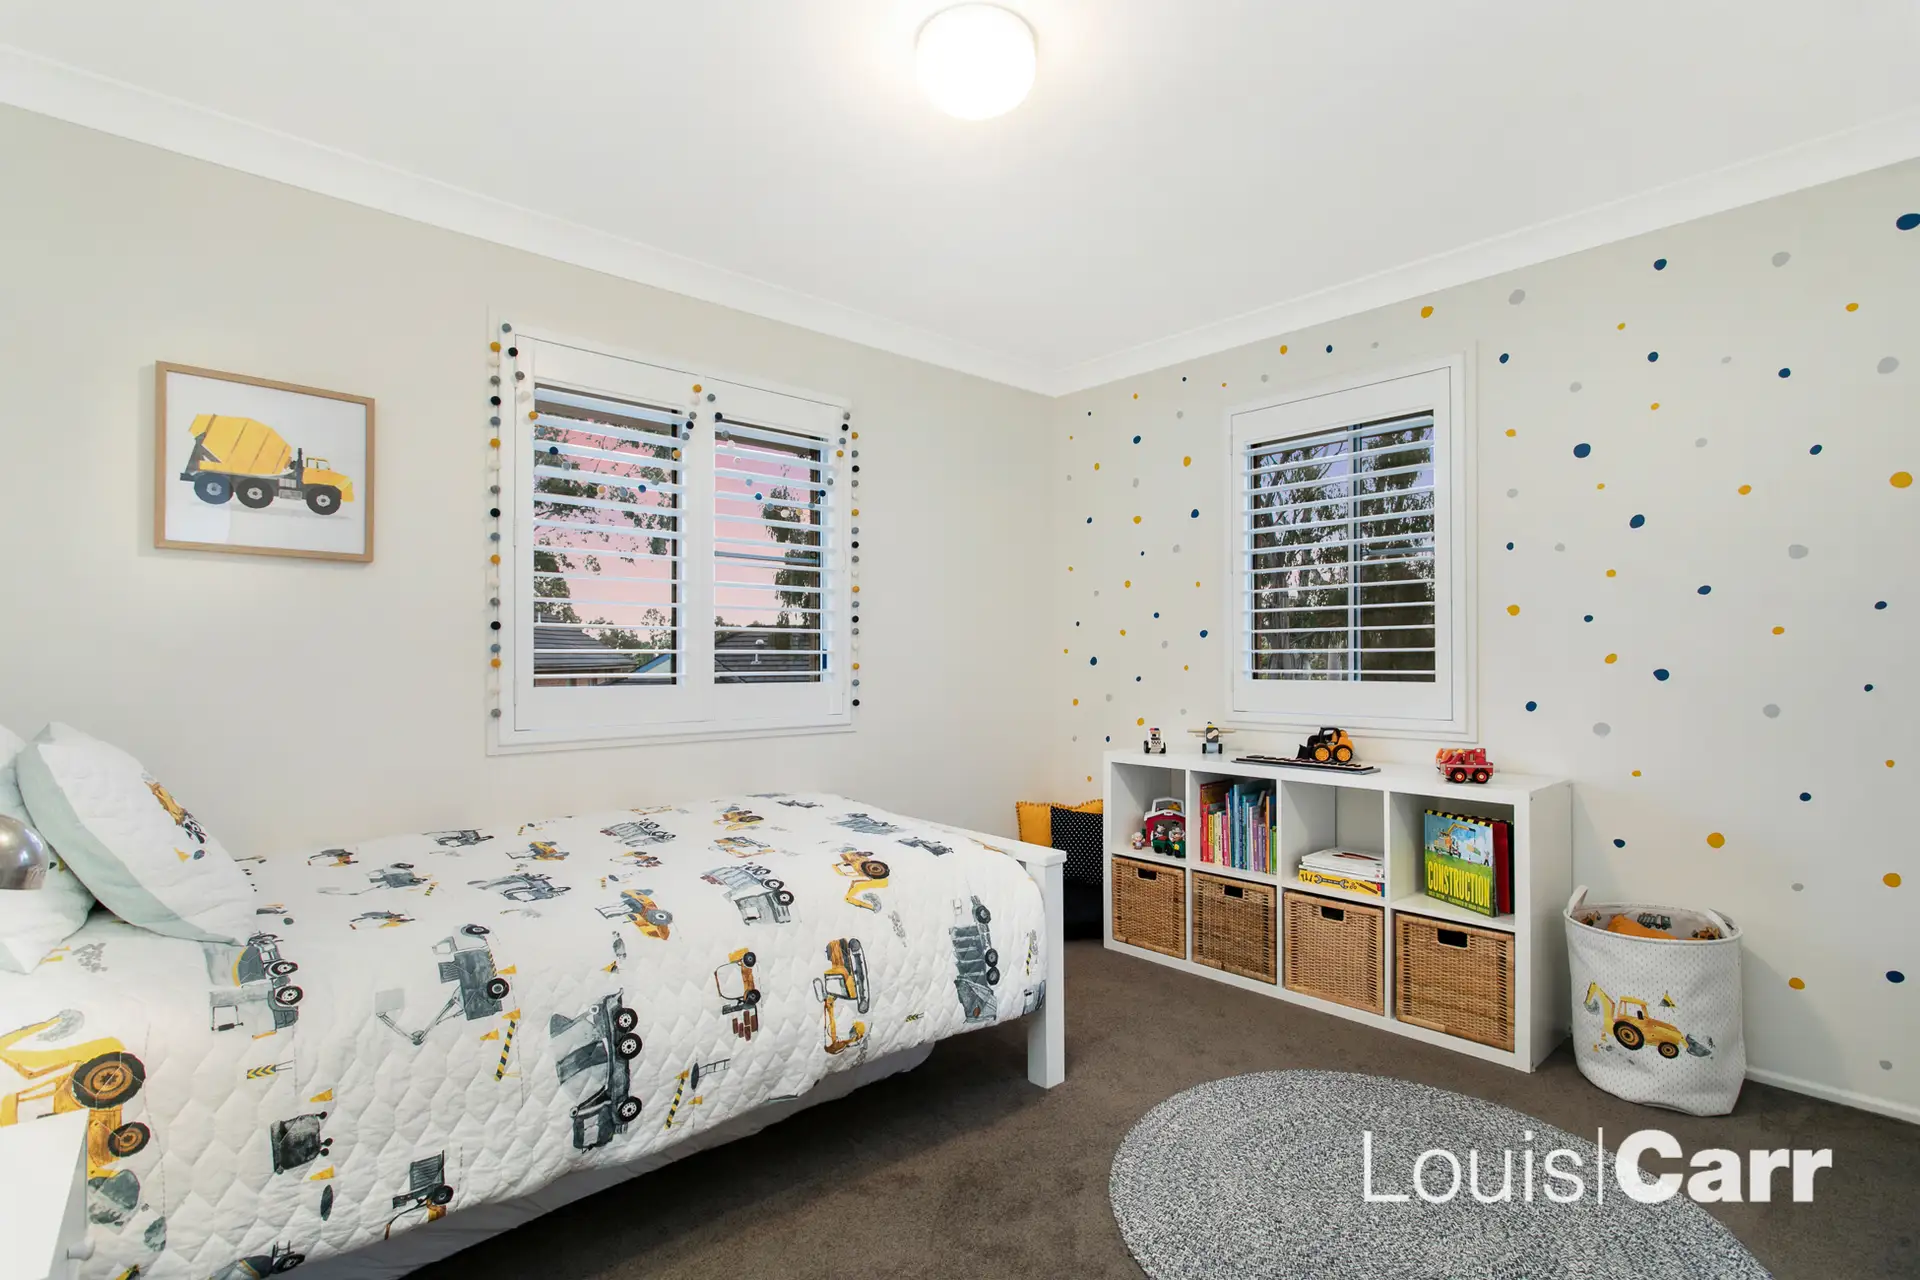 Photo #7: 22/8 View Street, West Pennant Hills - Sold by Louis Carr Real Estate